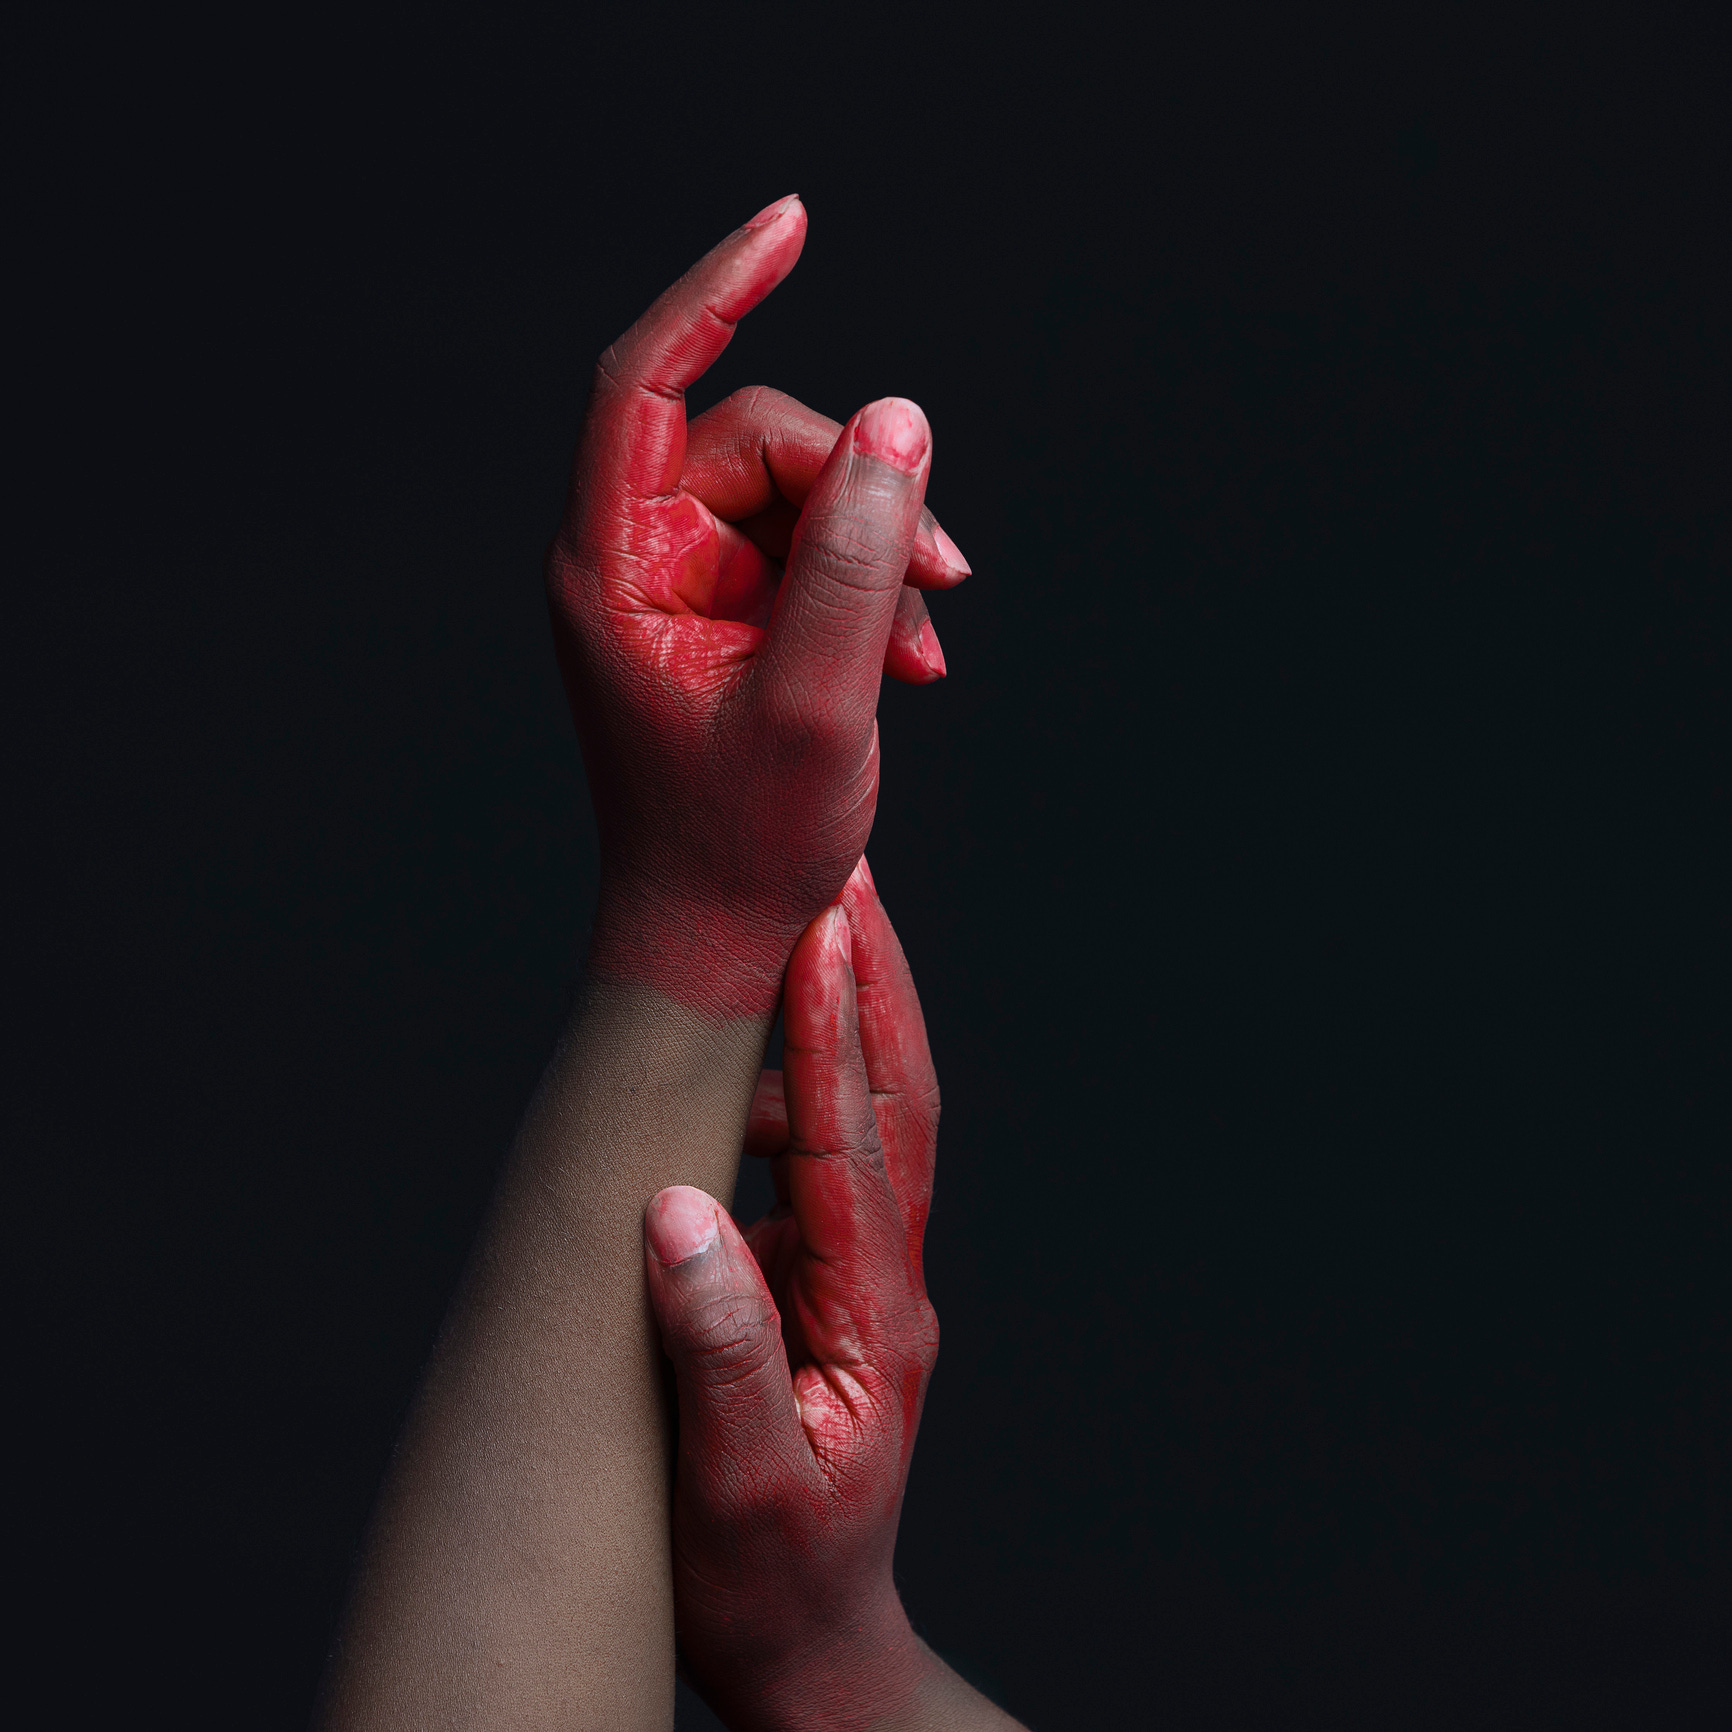 hands of a Black person, artfully posed, covered in red paint, against a black background